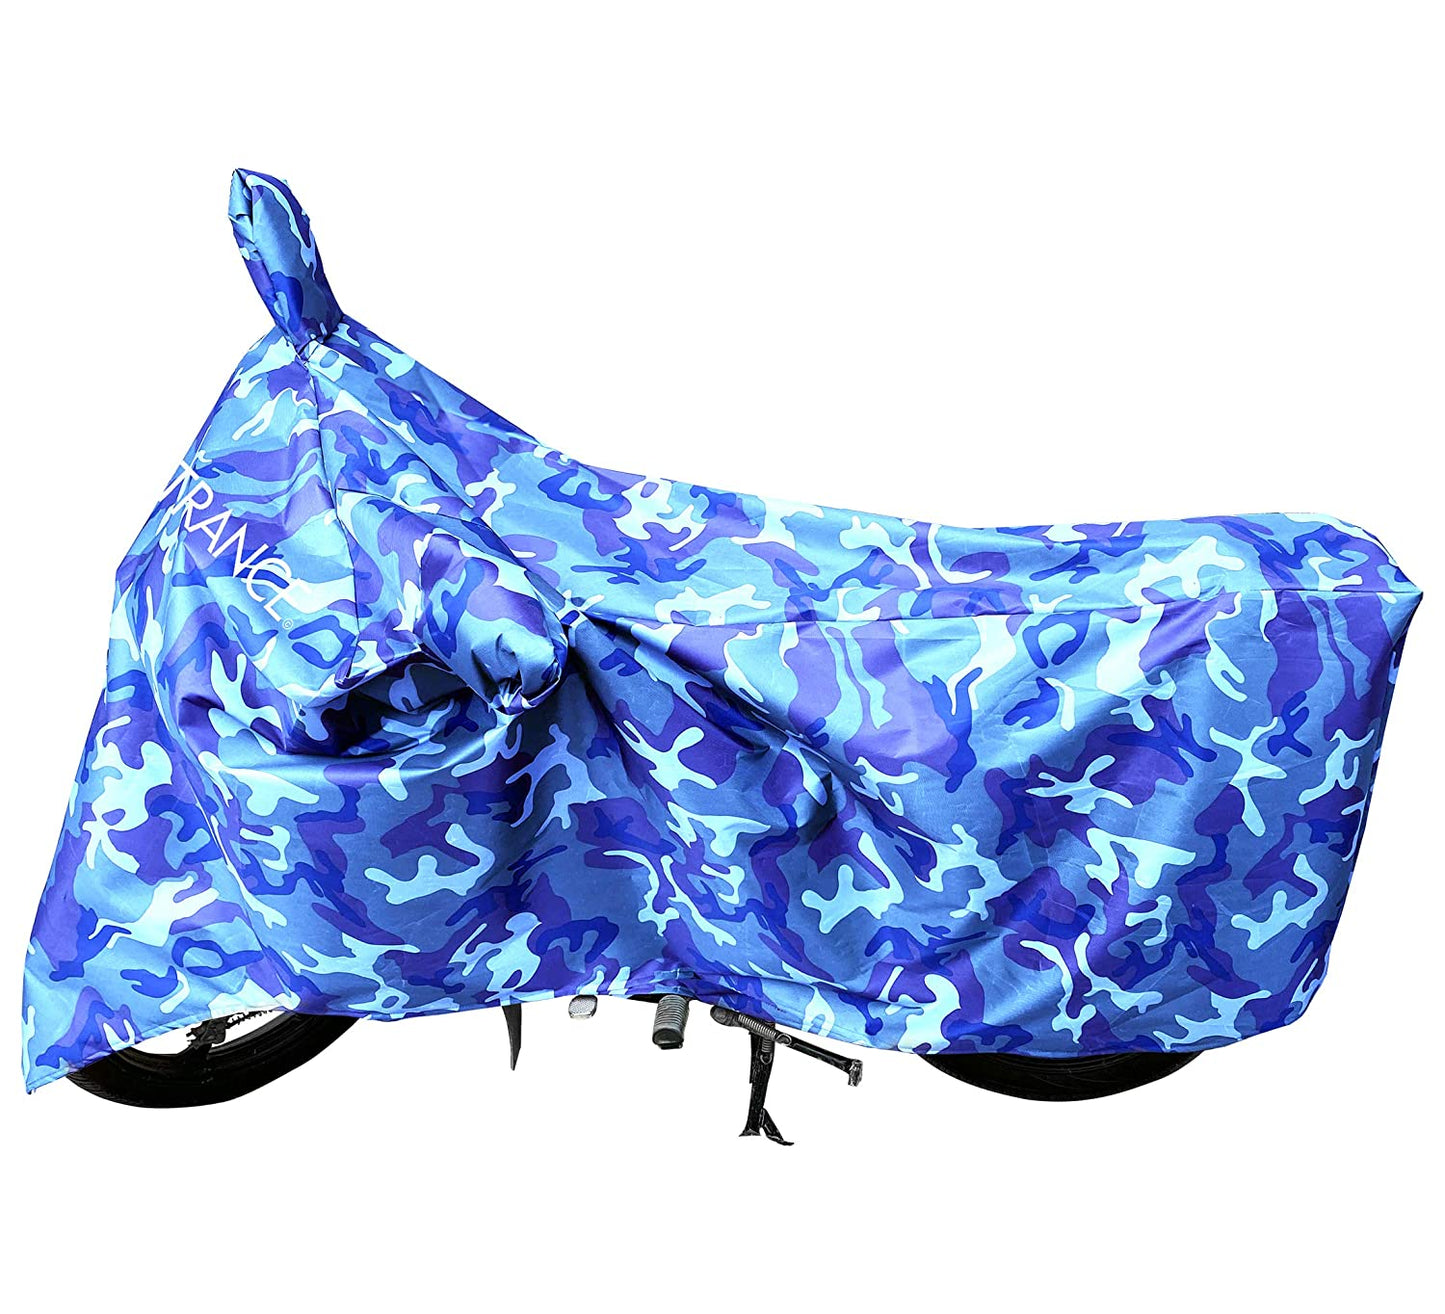 MotoTrance Jungle Bike Body Covers For Honda Hornet - Interlock-Stitched Waterproof and Heat Resistant with Mirror Pockets